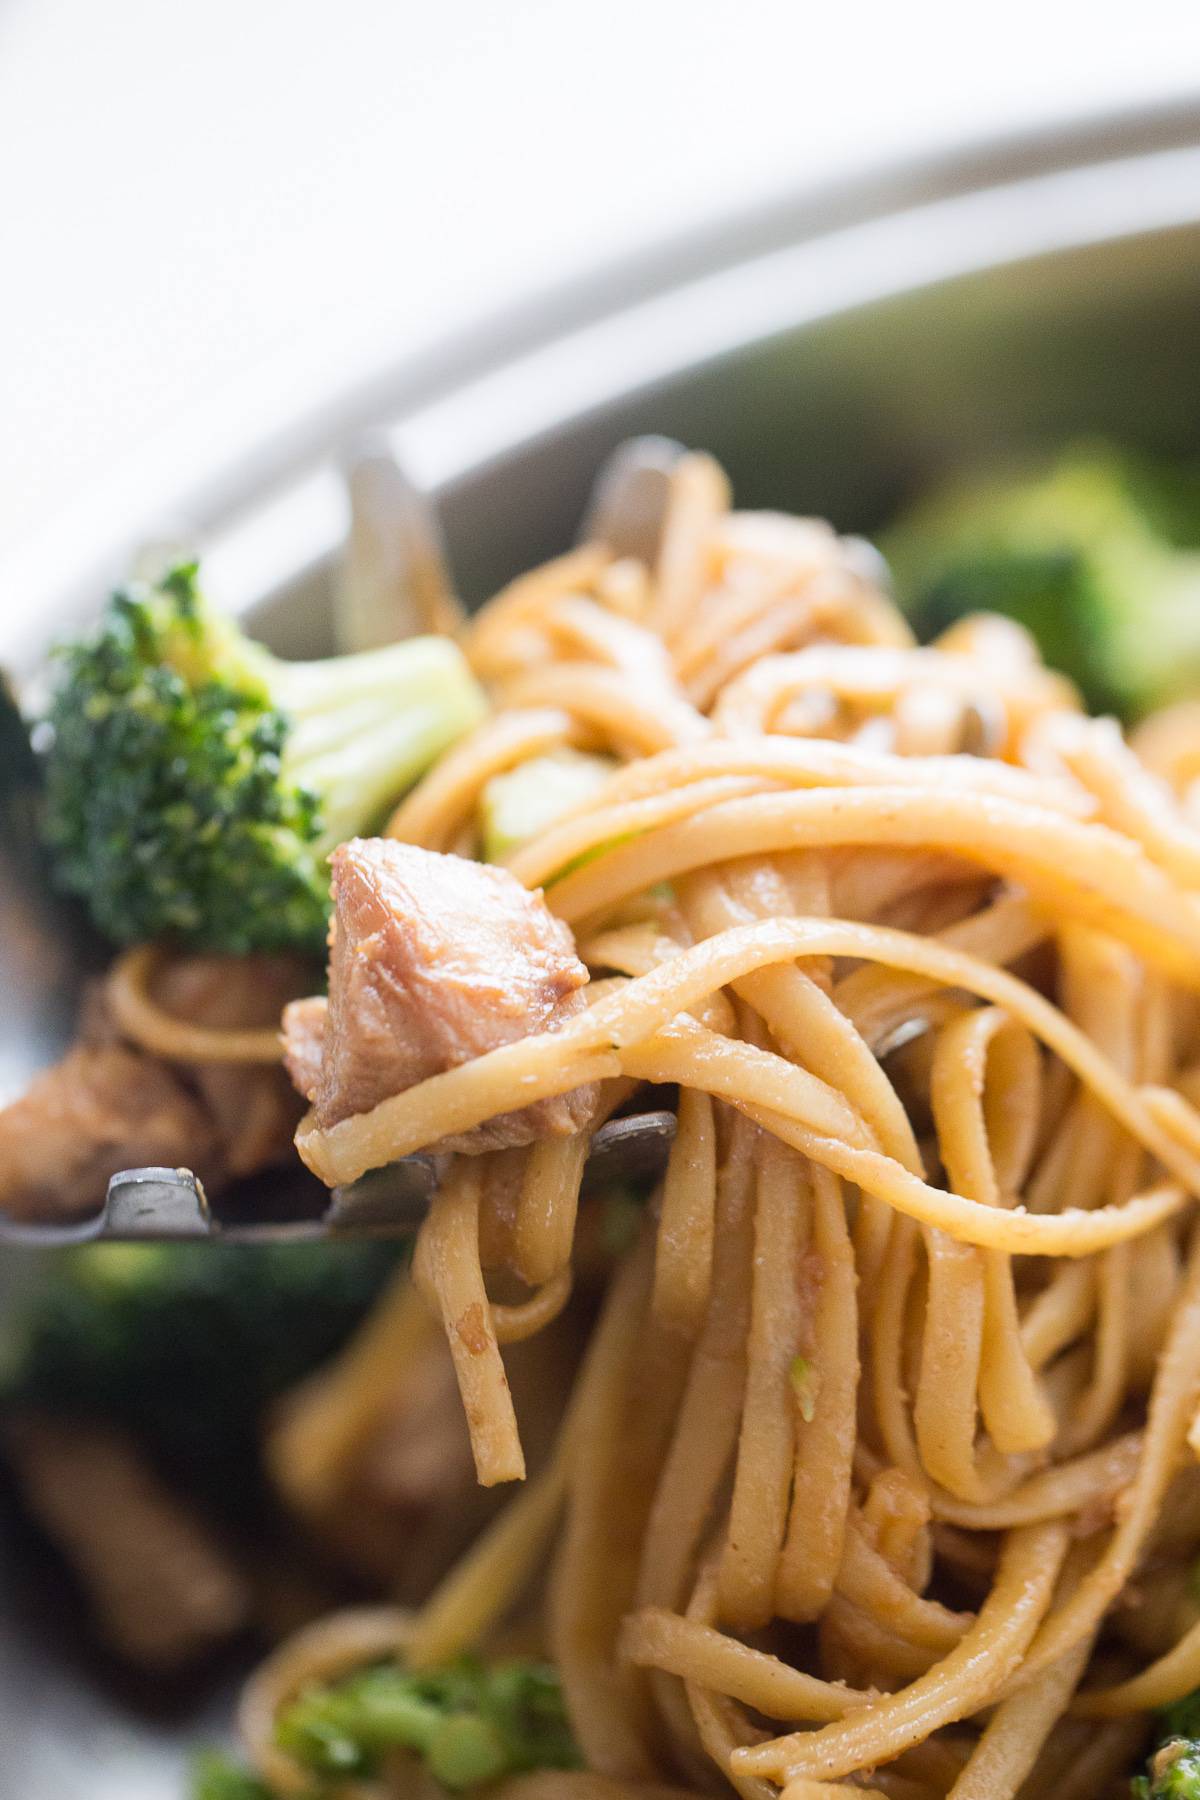 This chicken and broccoli stir fry is better than take out! You control the ingredients!